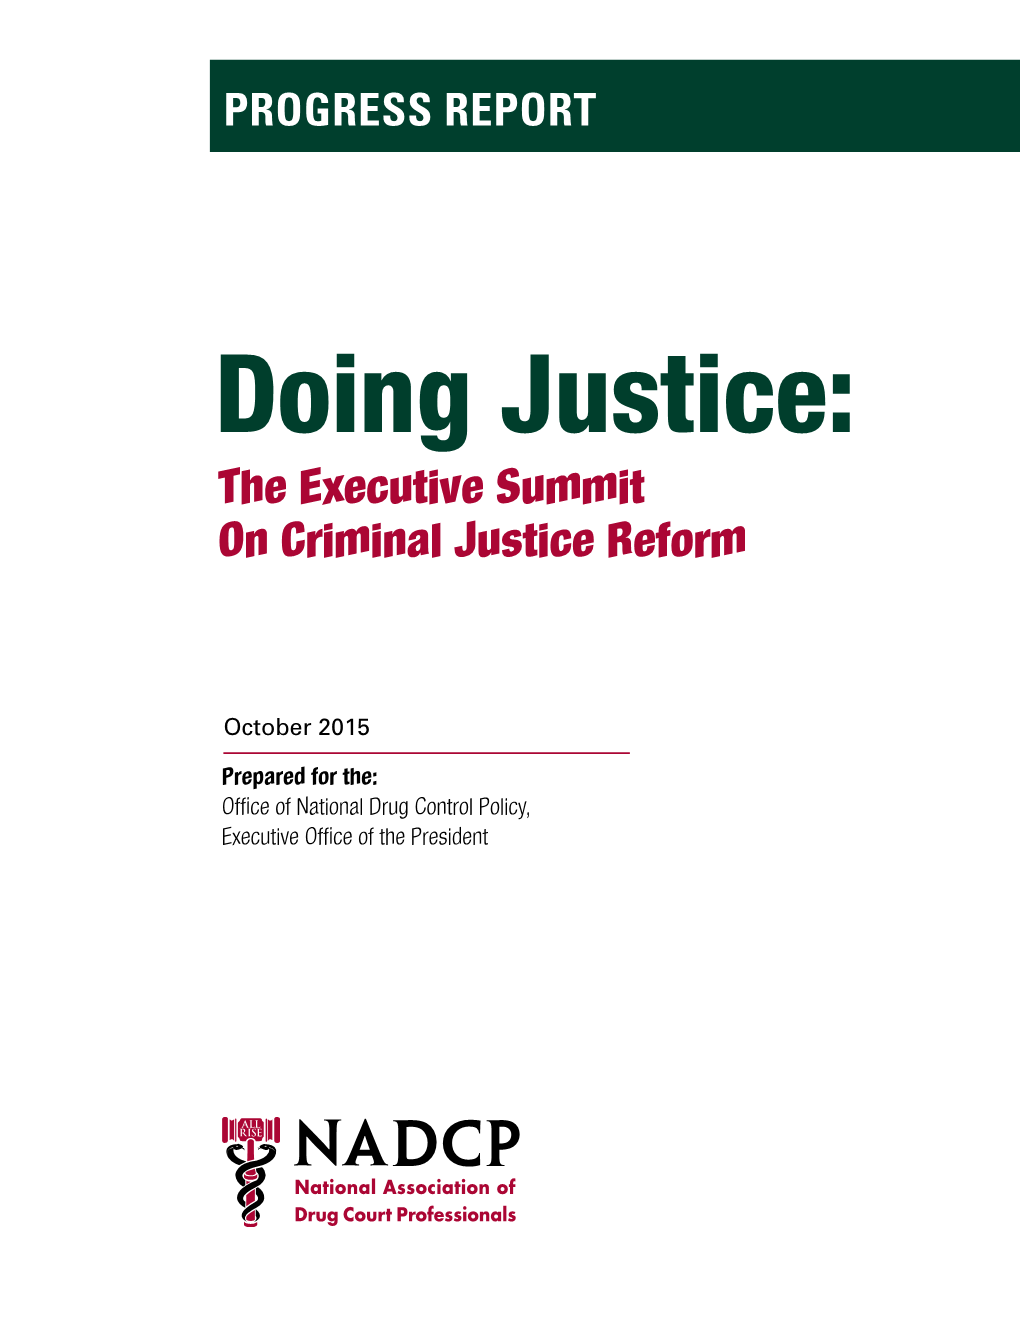 Doing Justice: the Executive Summit on Criminal Justice Reform